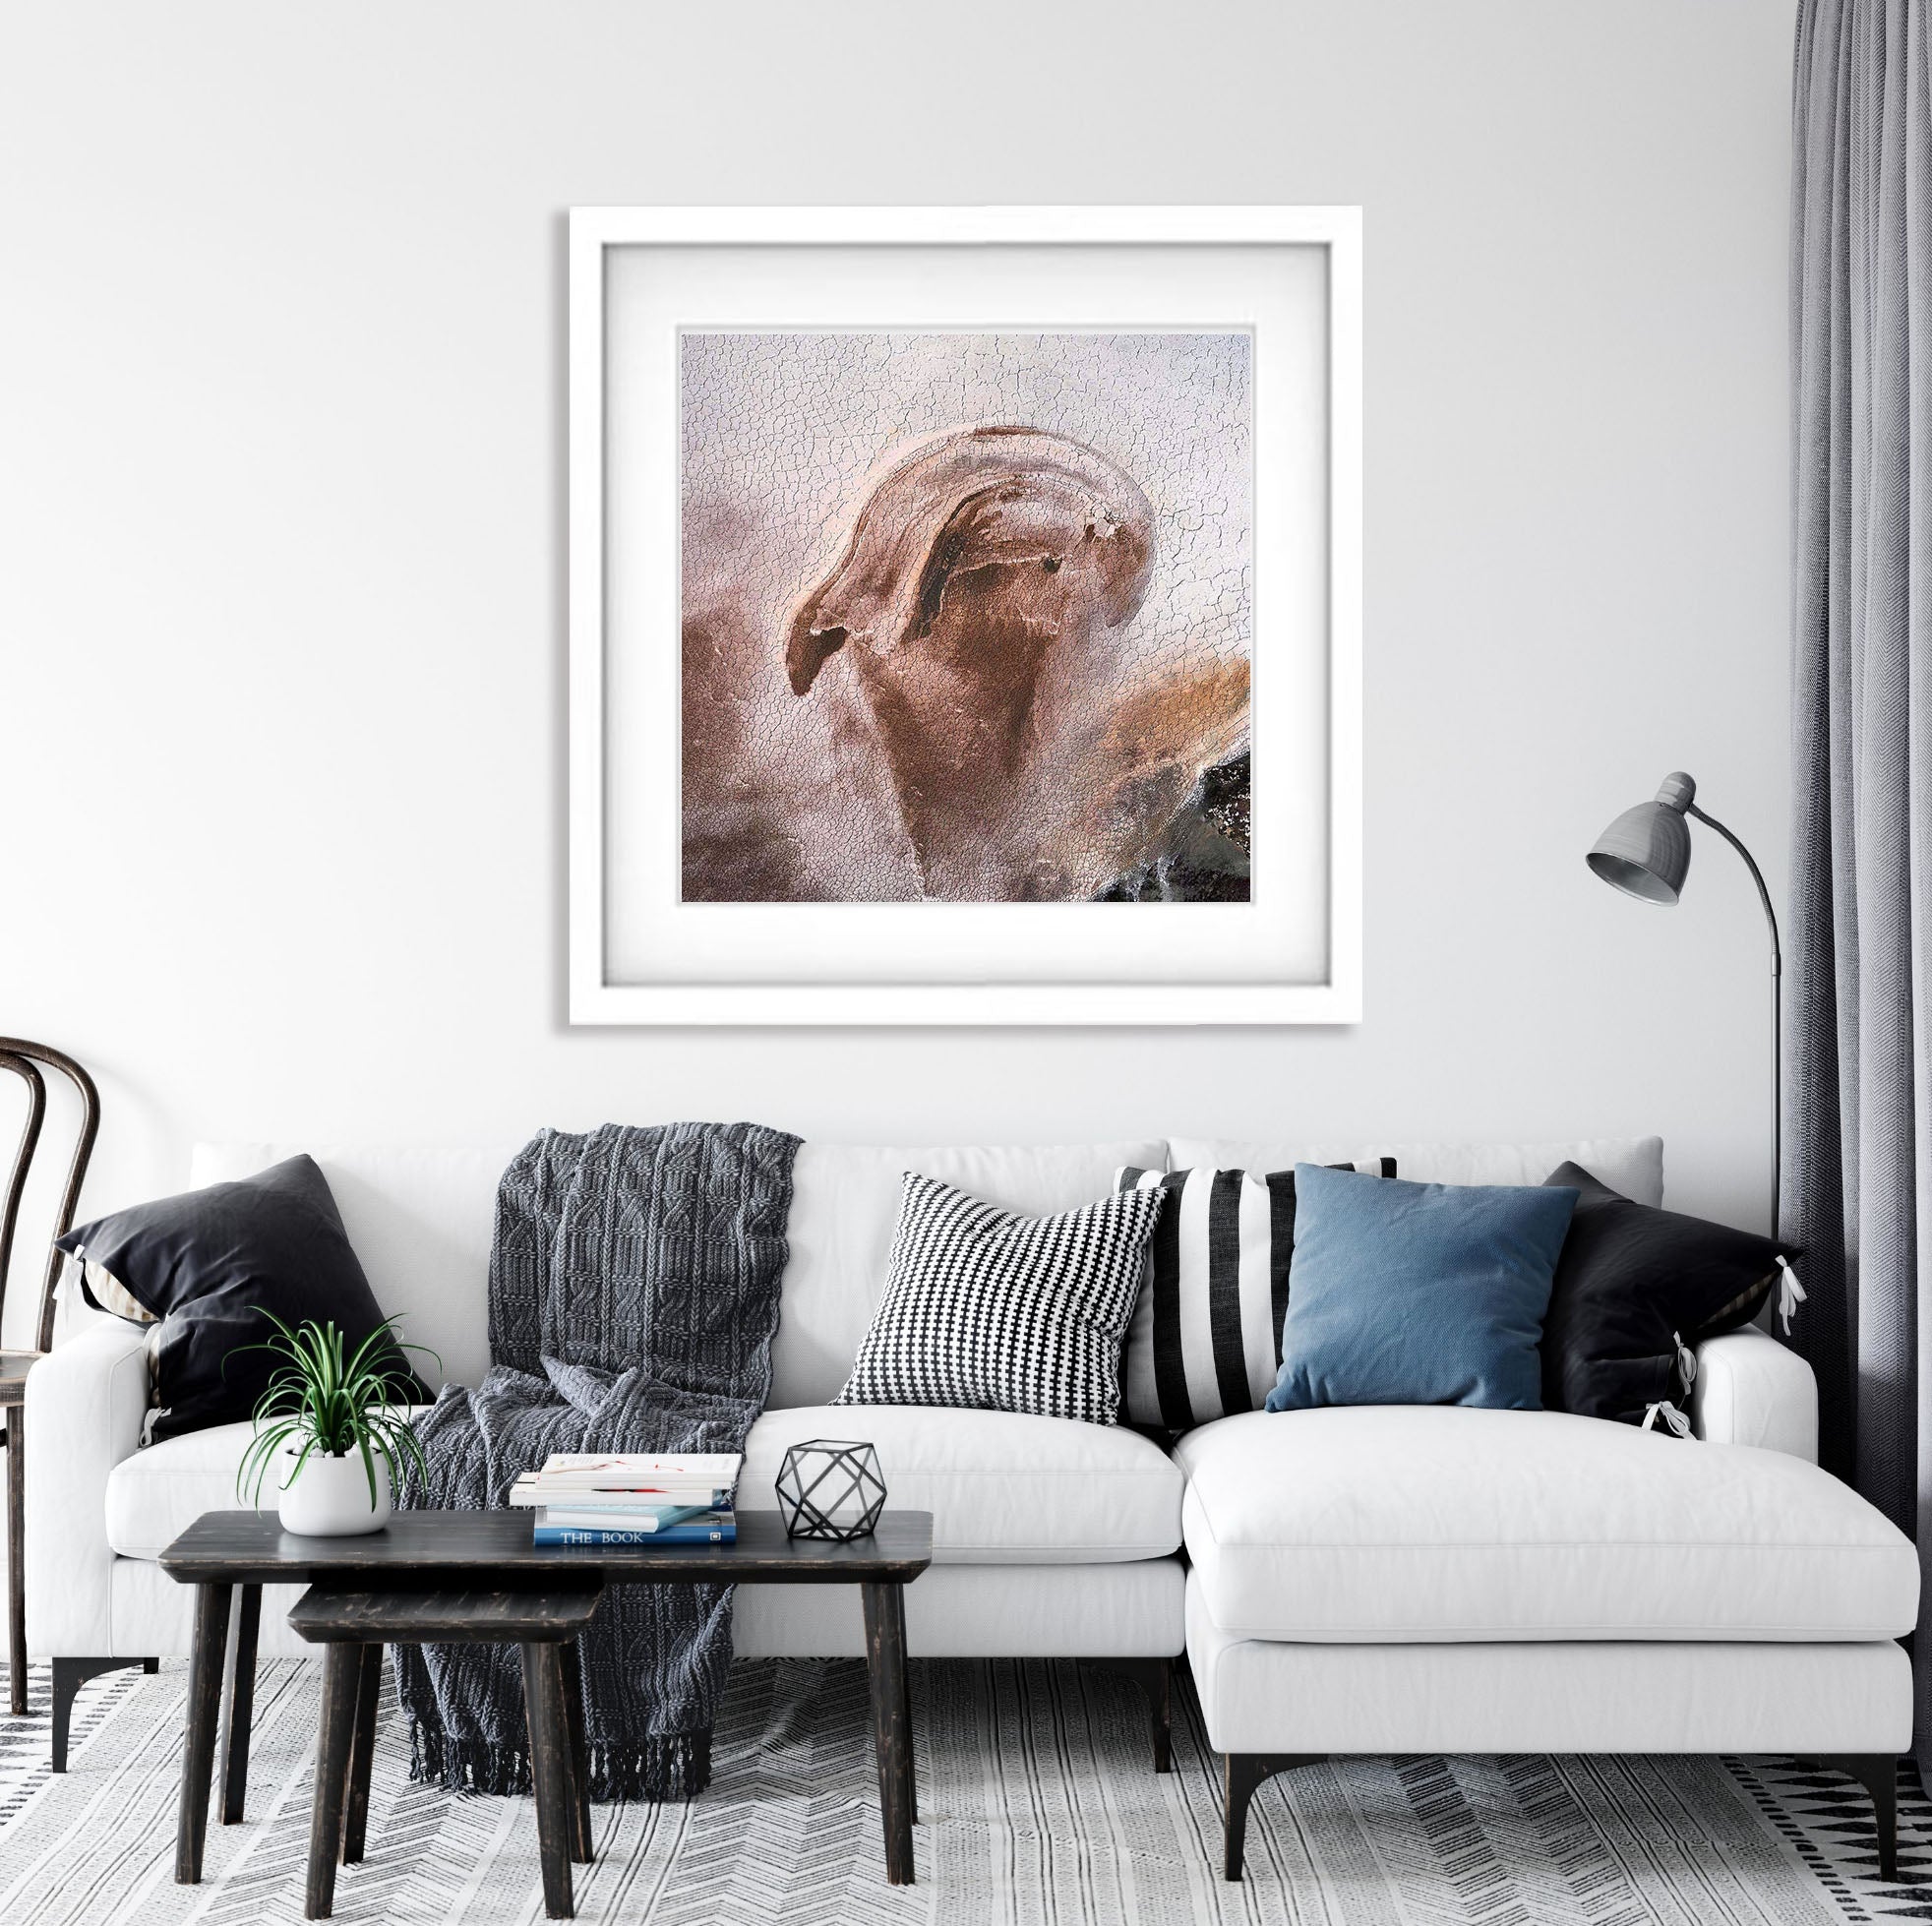 ARTWORK INSTOCK - Birdman - Available 150 x 150cms mounted print (ready to frame) in the gallery TODAY!